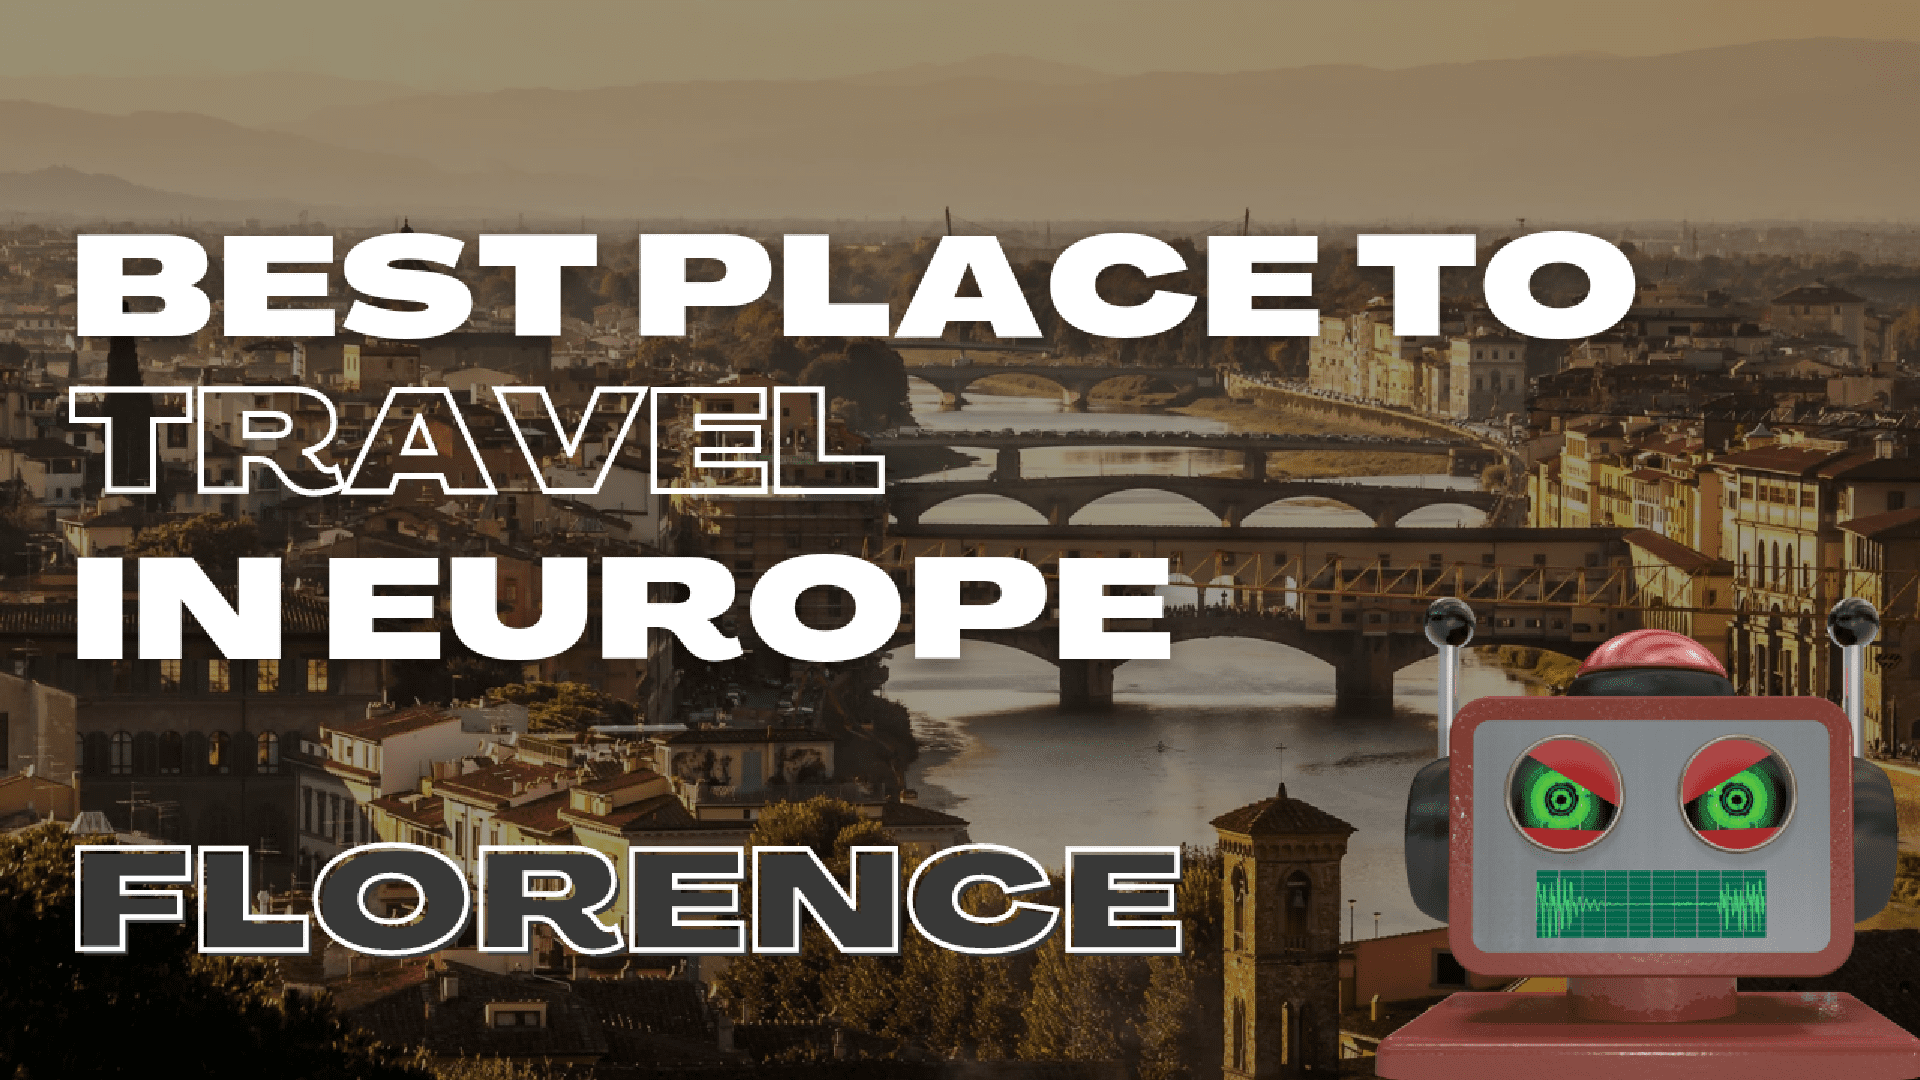 Best Place to Travel In Europe (Florence)